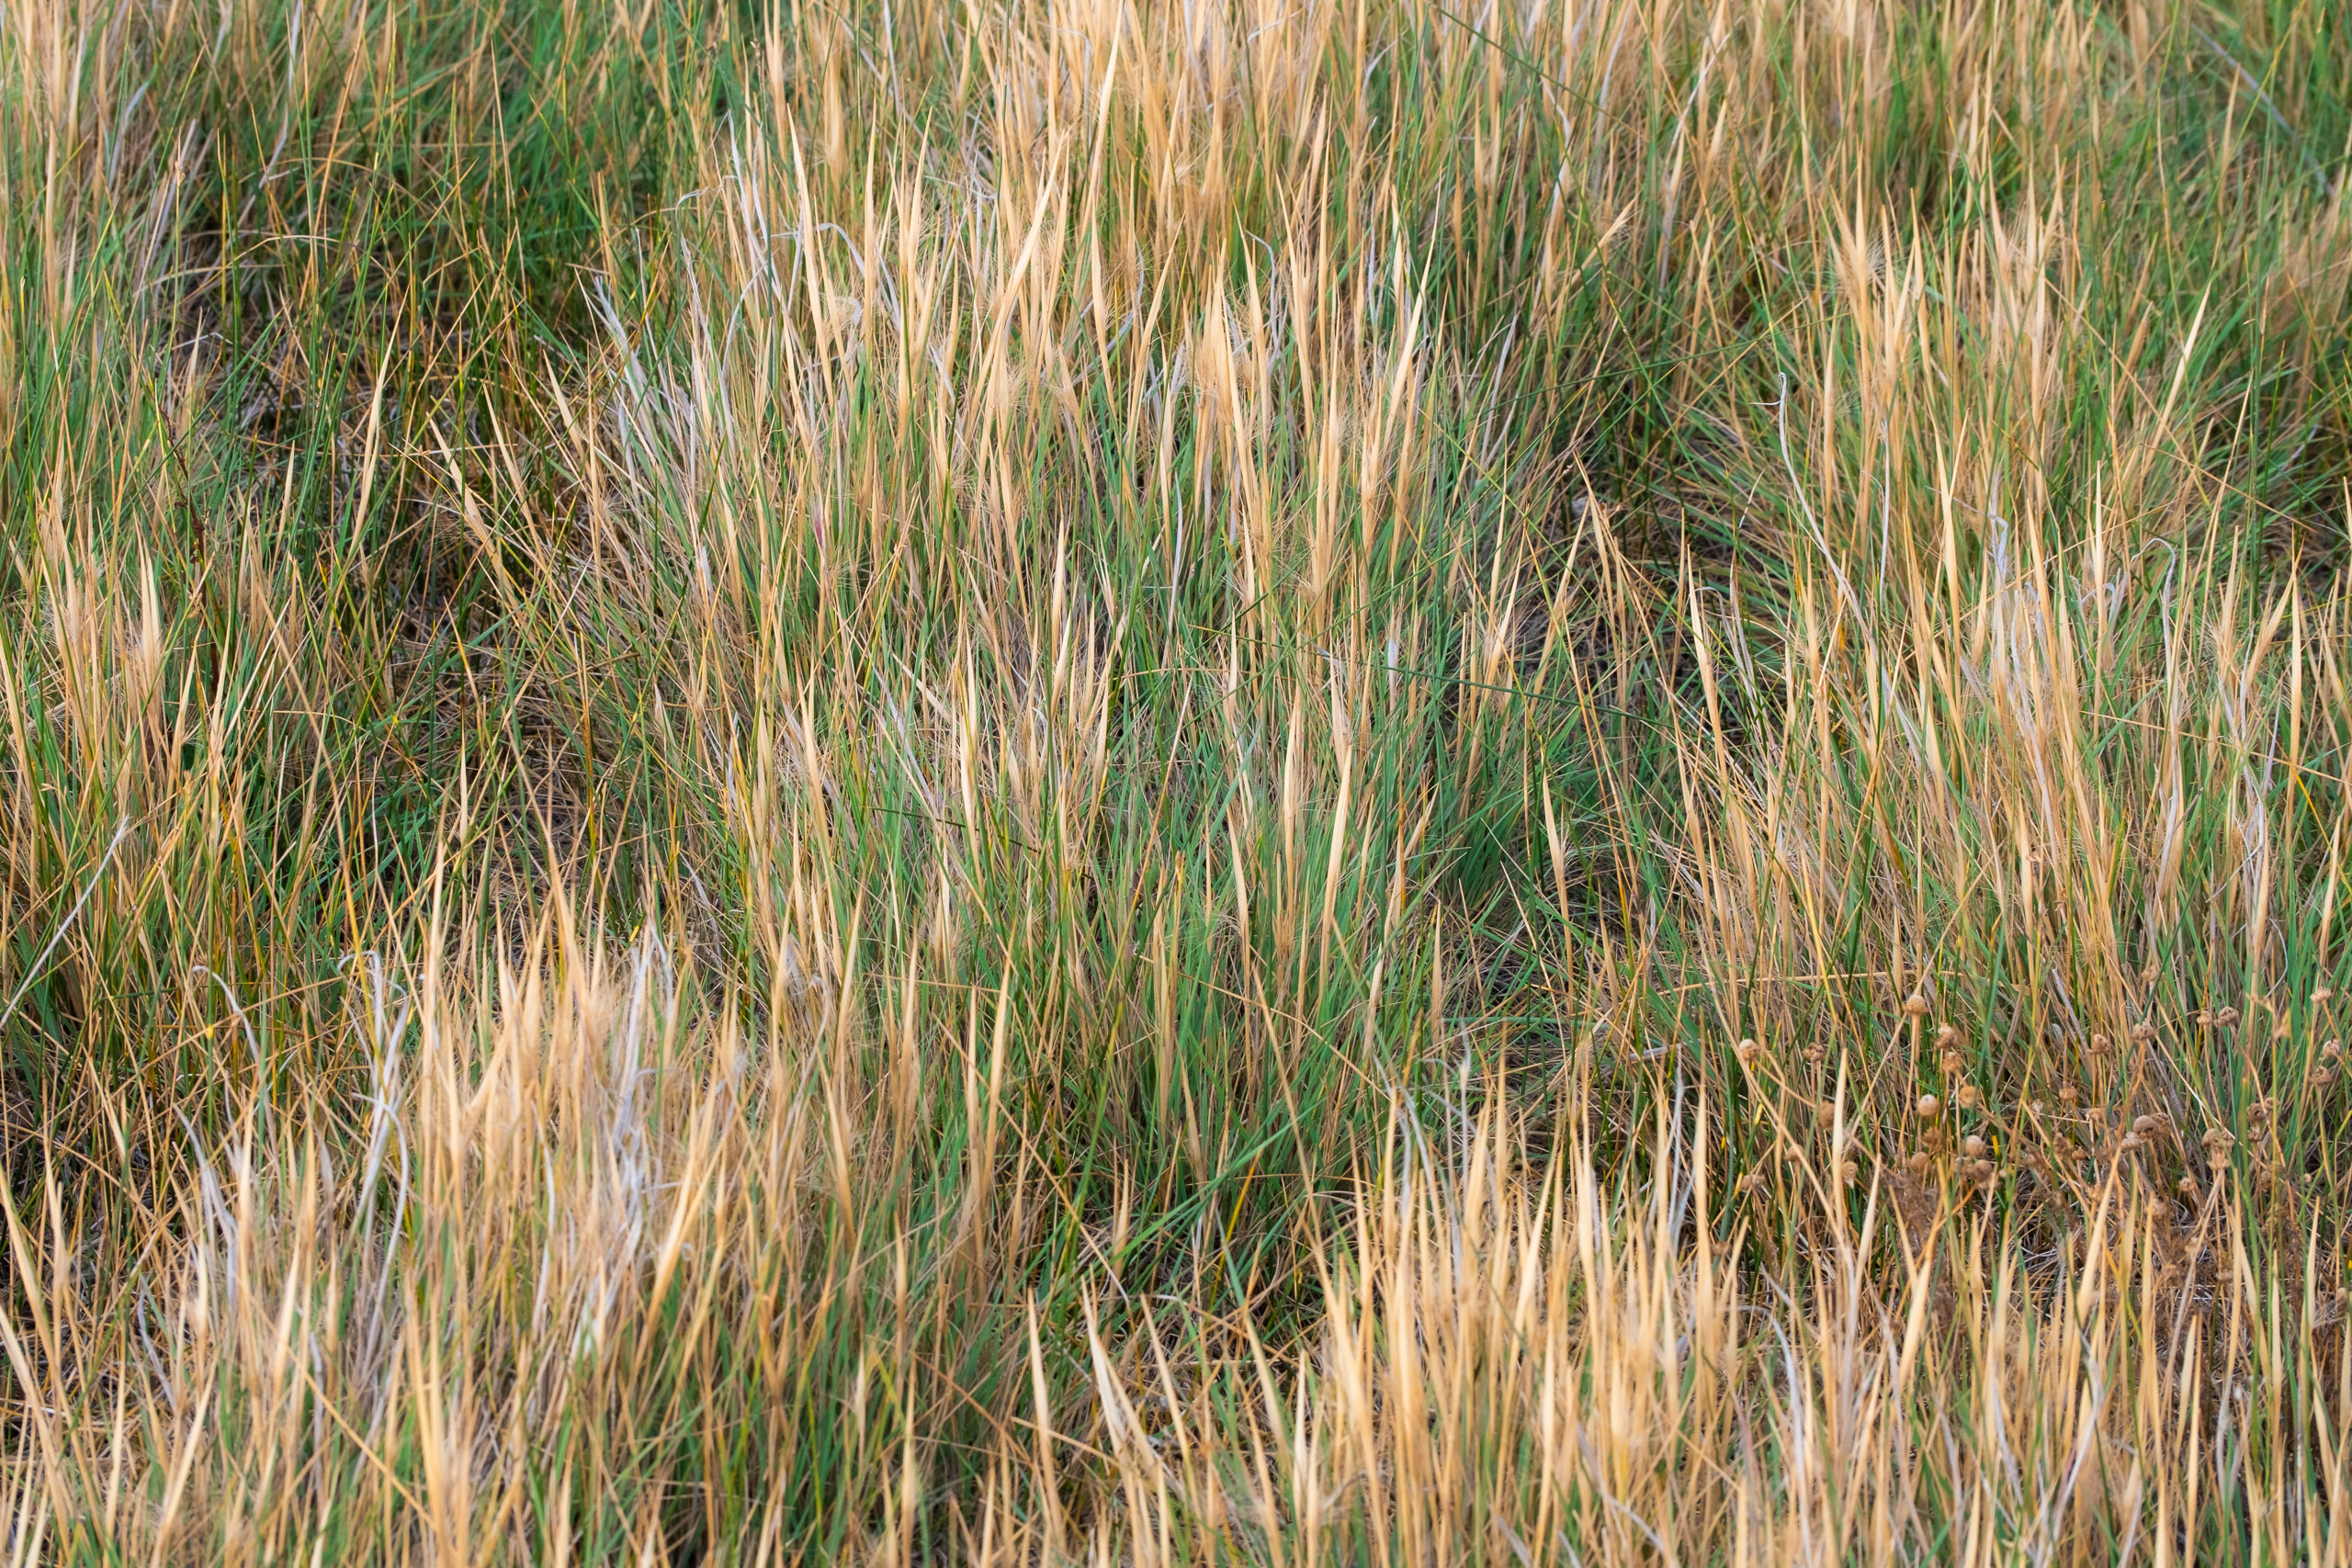 Abstract grass texture from Patagonia, Argentina